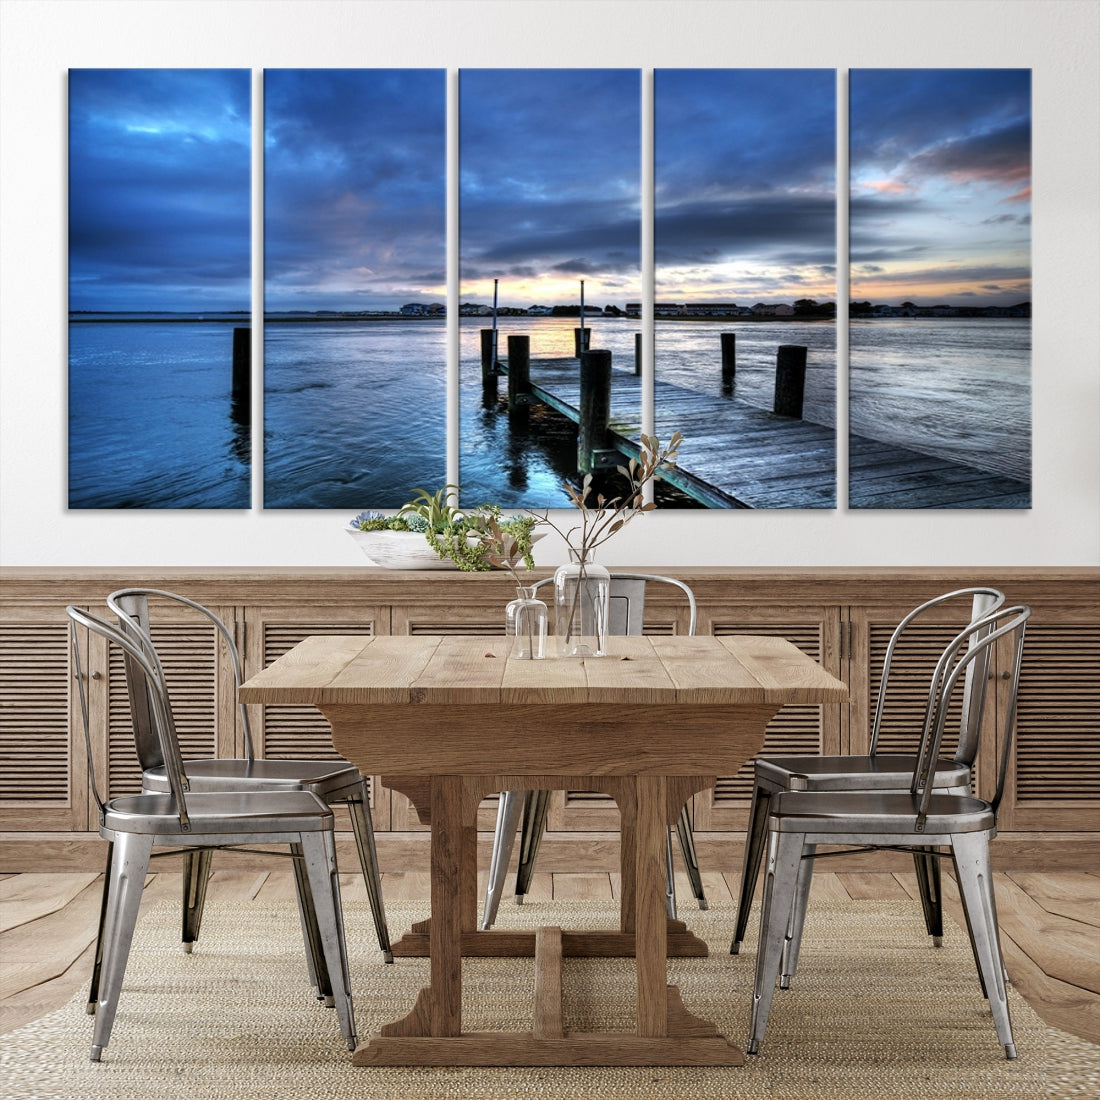 Large Wall Art Canvas Print Pier on Dark Sea with Town Behind at Sunset